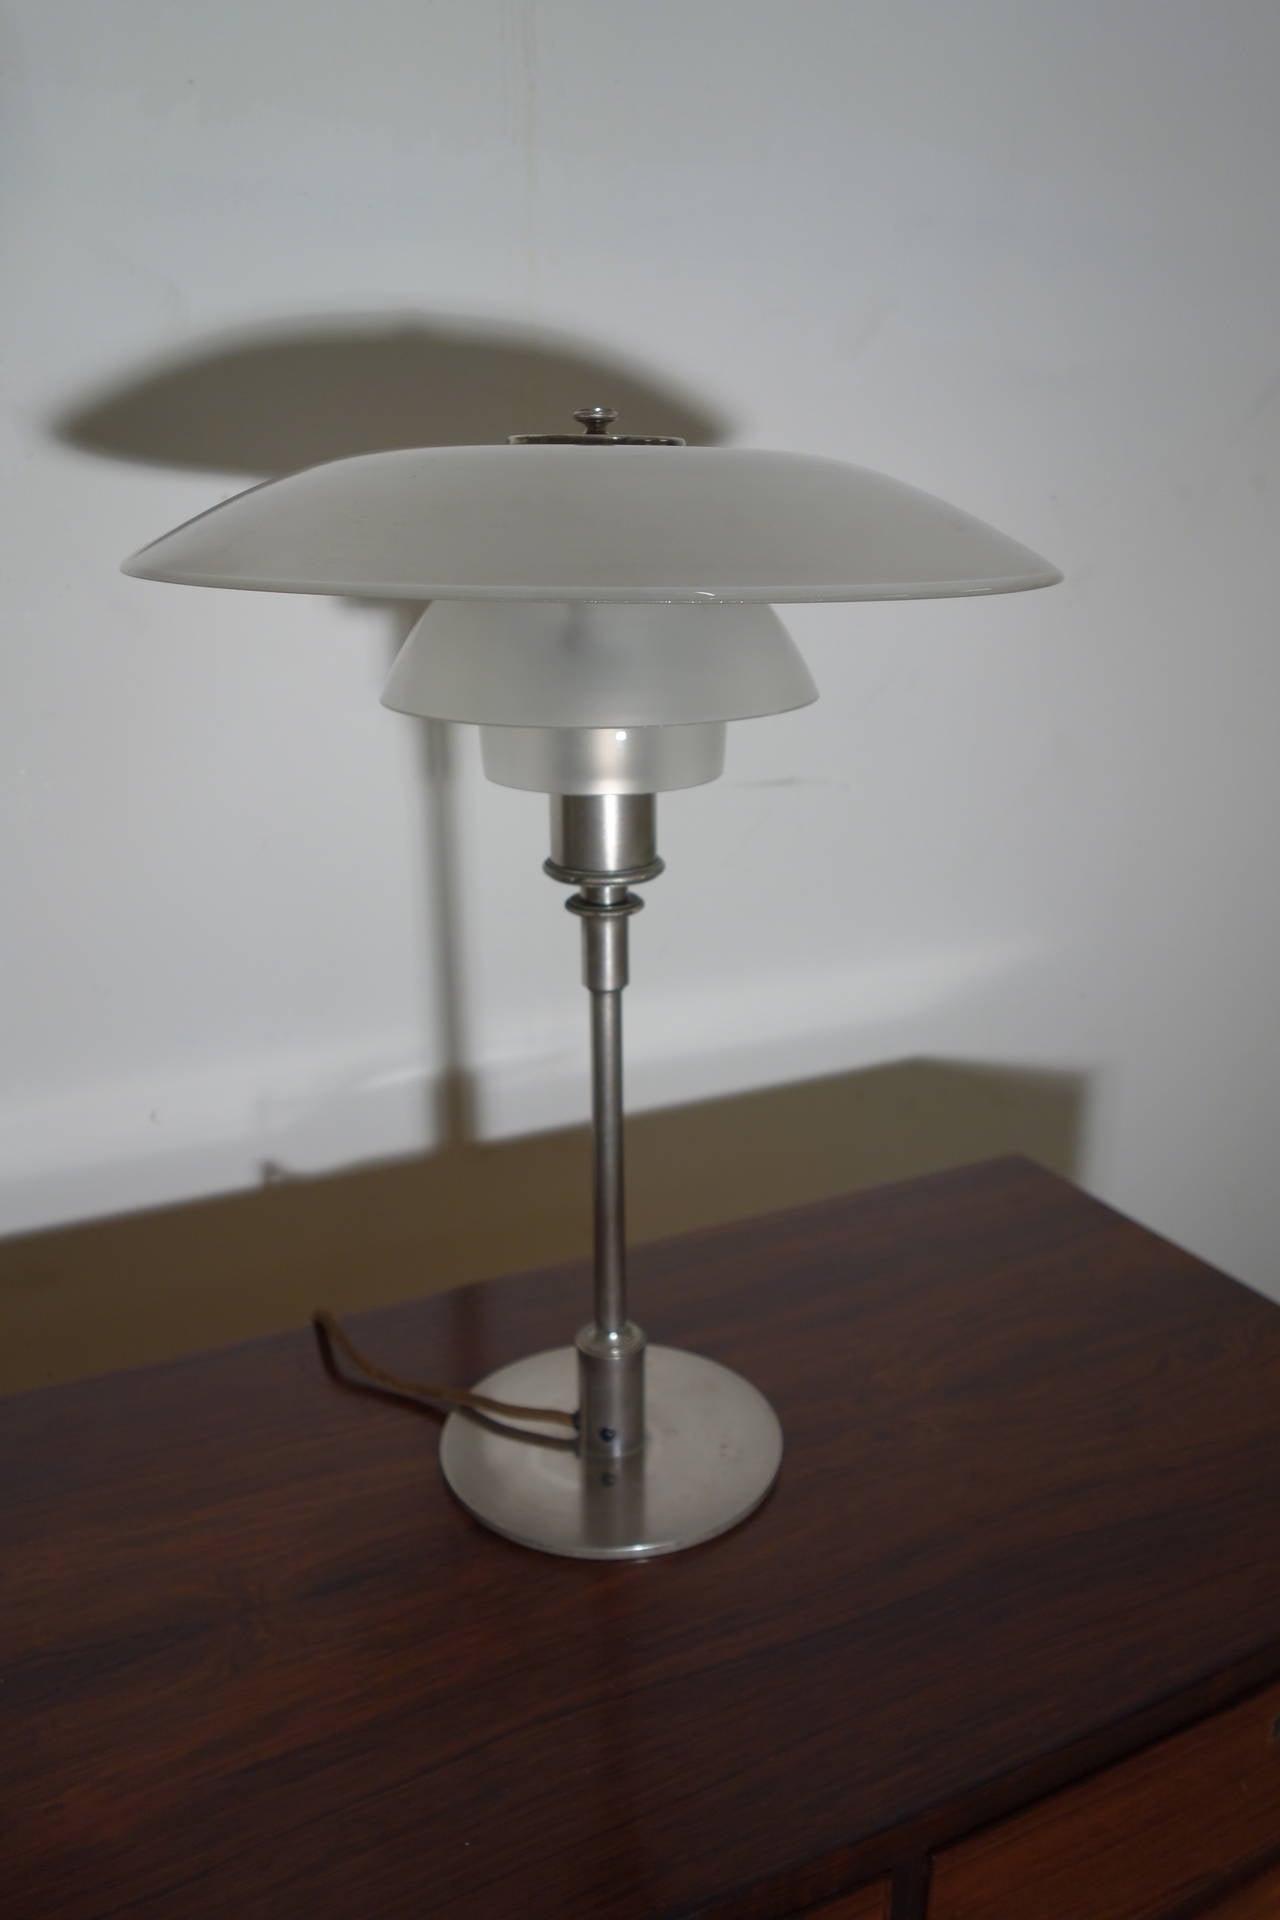 Poul Henningsen desk lamp PH 4/3. Bade in nickel plated metal and shades in frosted glass. Made by Louis Poulsen in the 1930s.

All images available in high resolution on request.